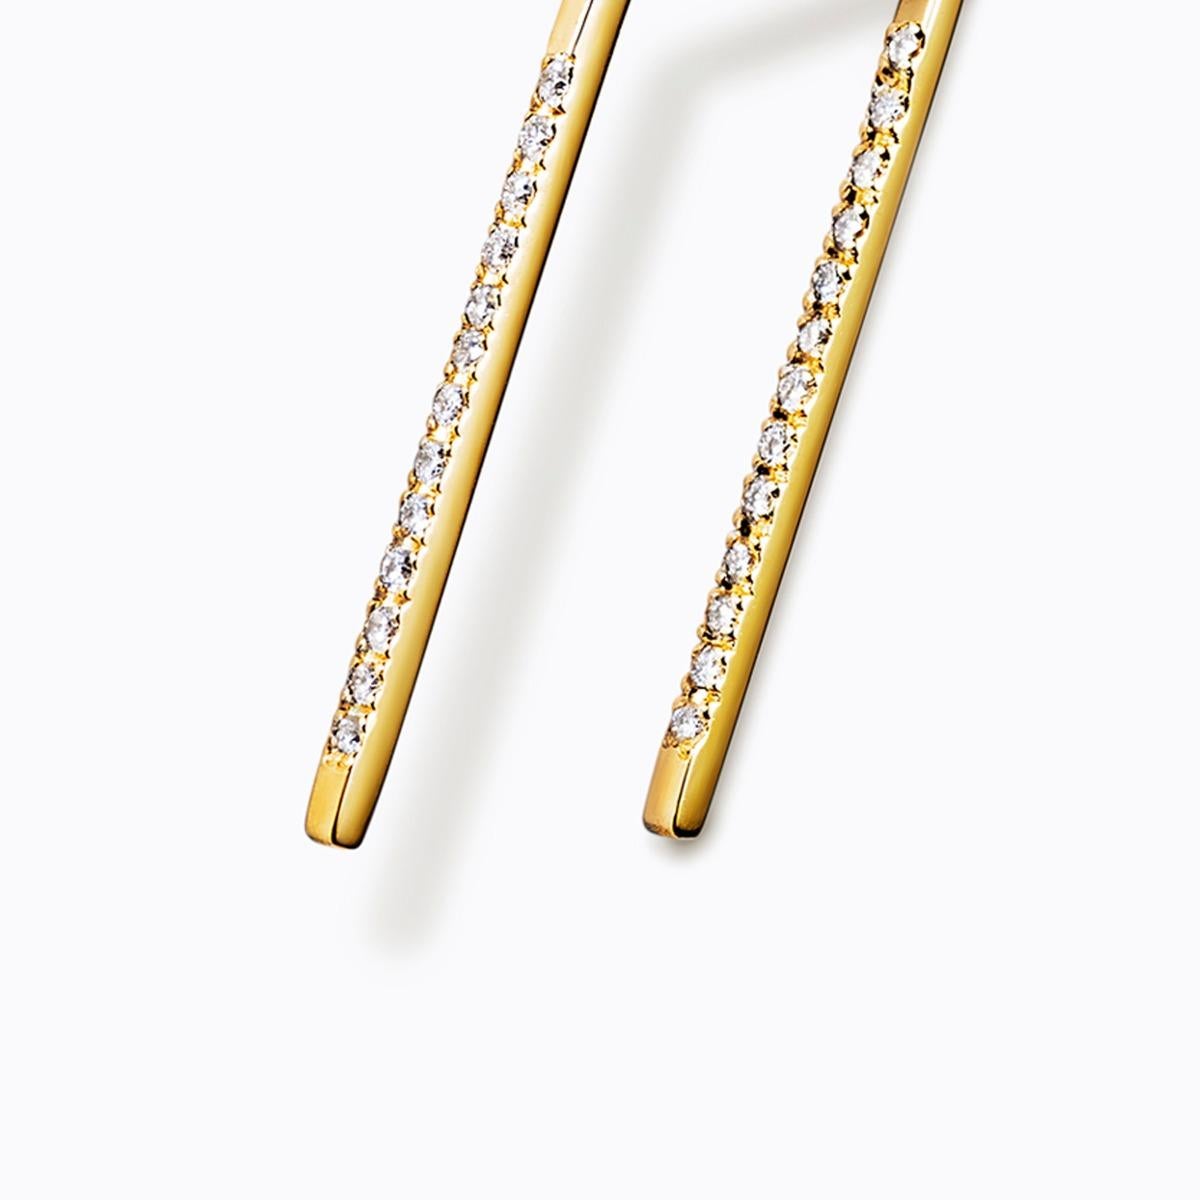 This earring features micro diamonds in a pavé setting along two lines. The micro diamonds are small enough that it can go through the pierced hole. This can be worn without an earring back.

Diamonds: 0.7mm x 25
Post length: 15.5mm, 7.5mm, 15.5mm